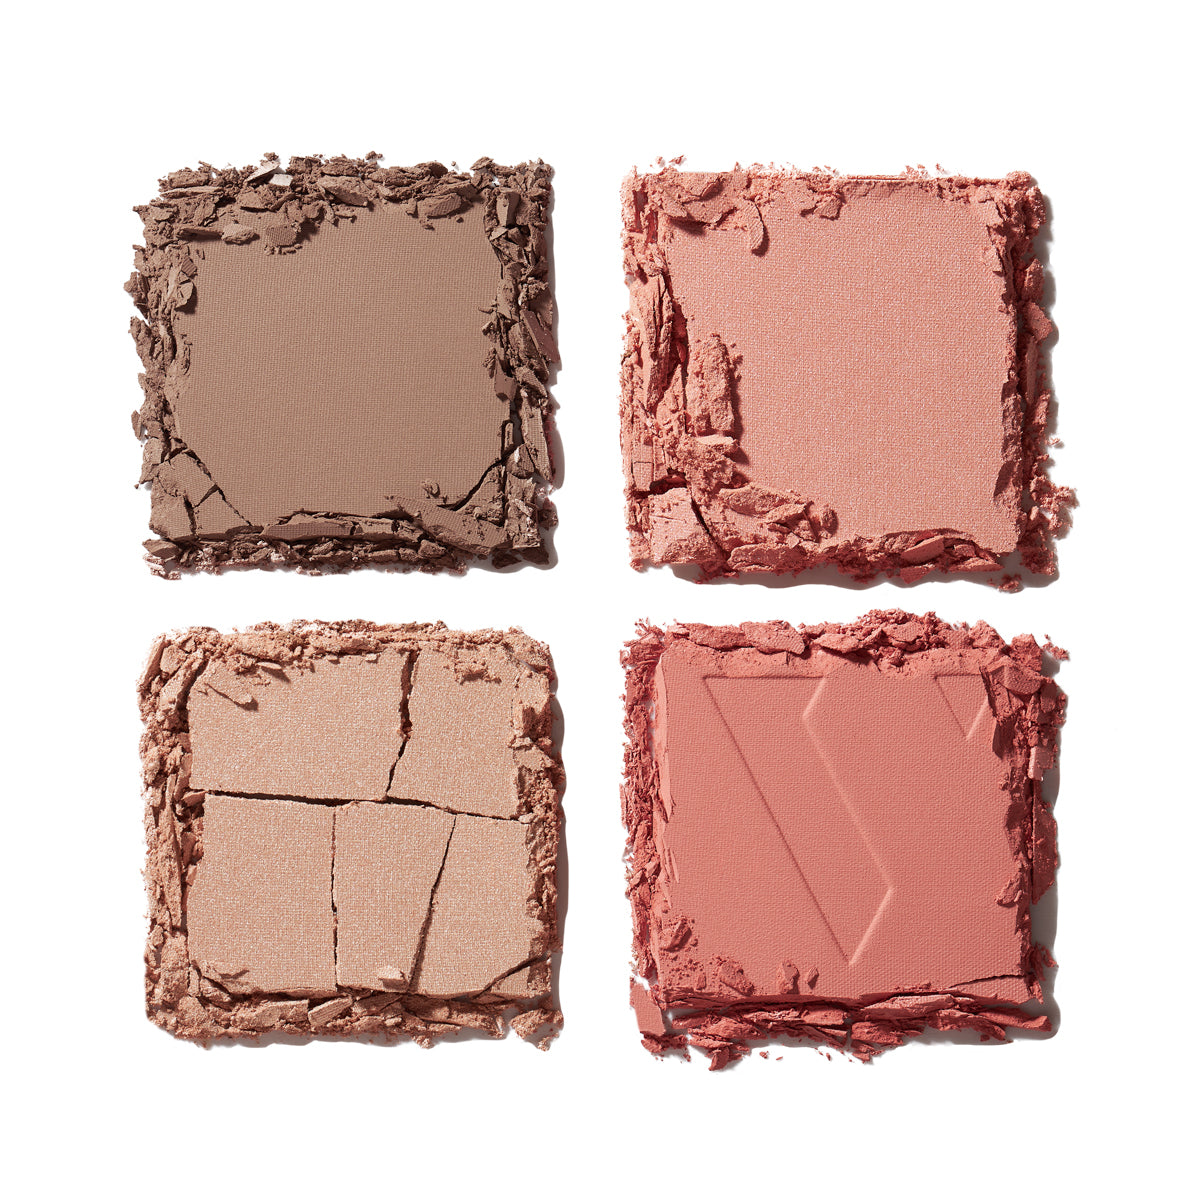 UNIVERSAL PALETTE FOR FACE MAKE-UP